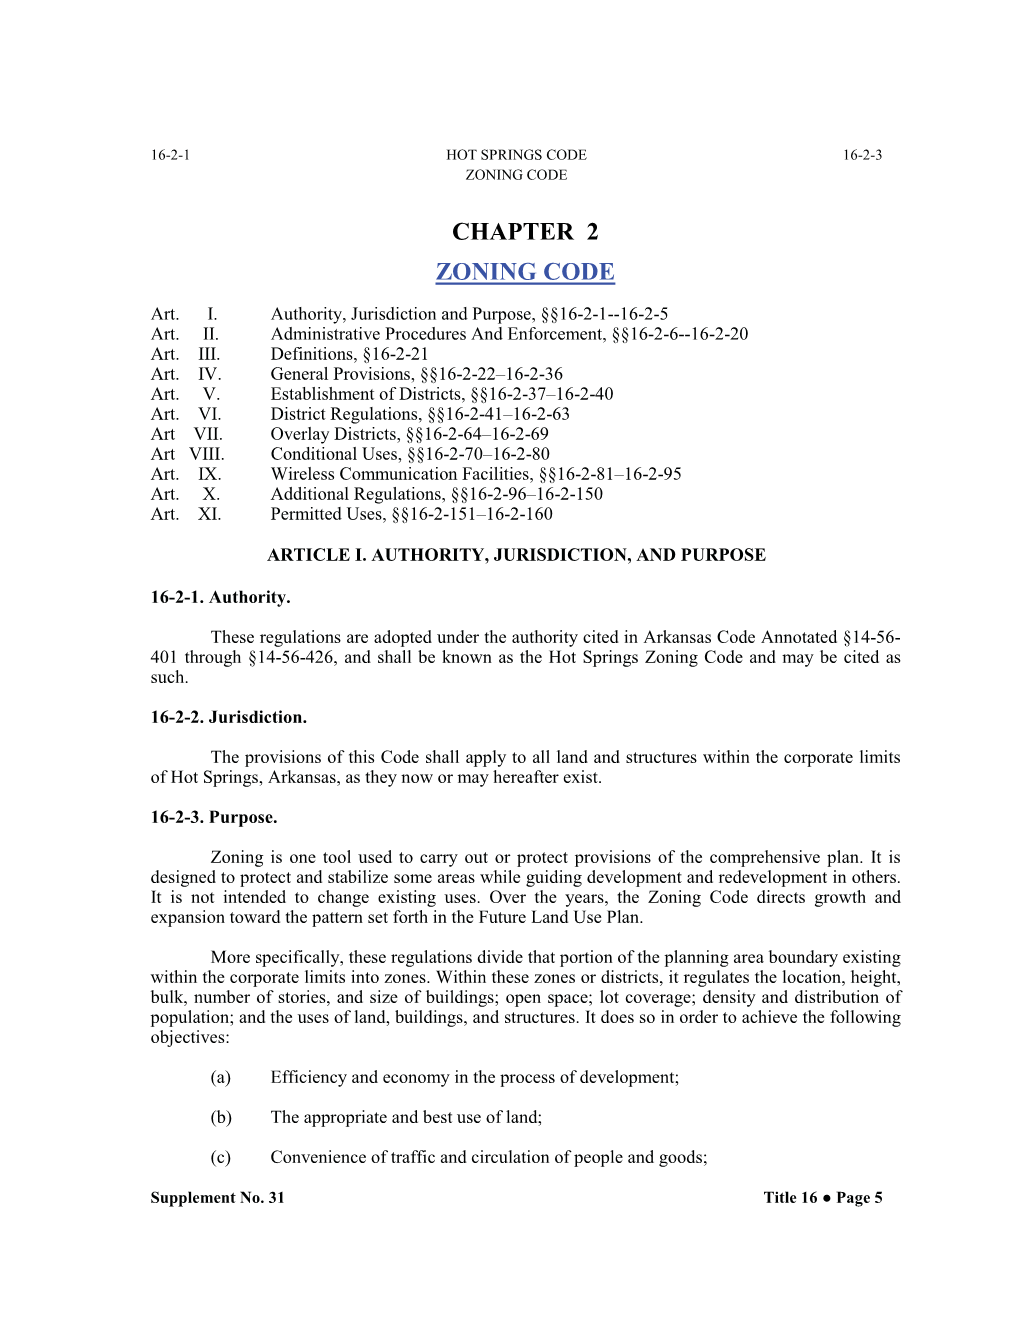 Chapter 2 Zoning Code